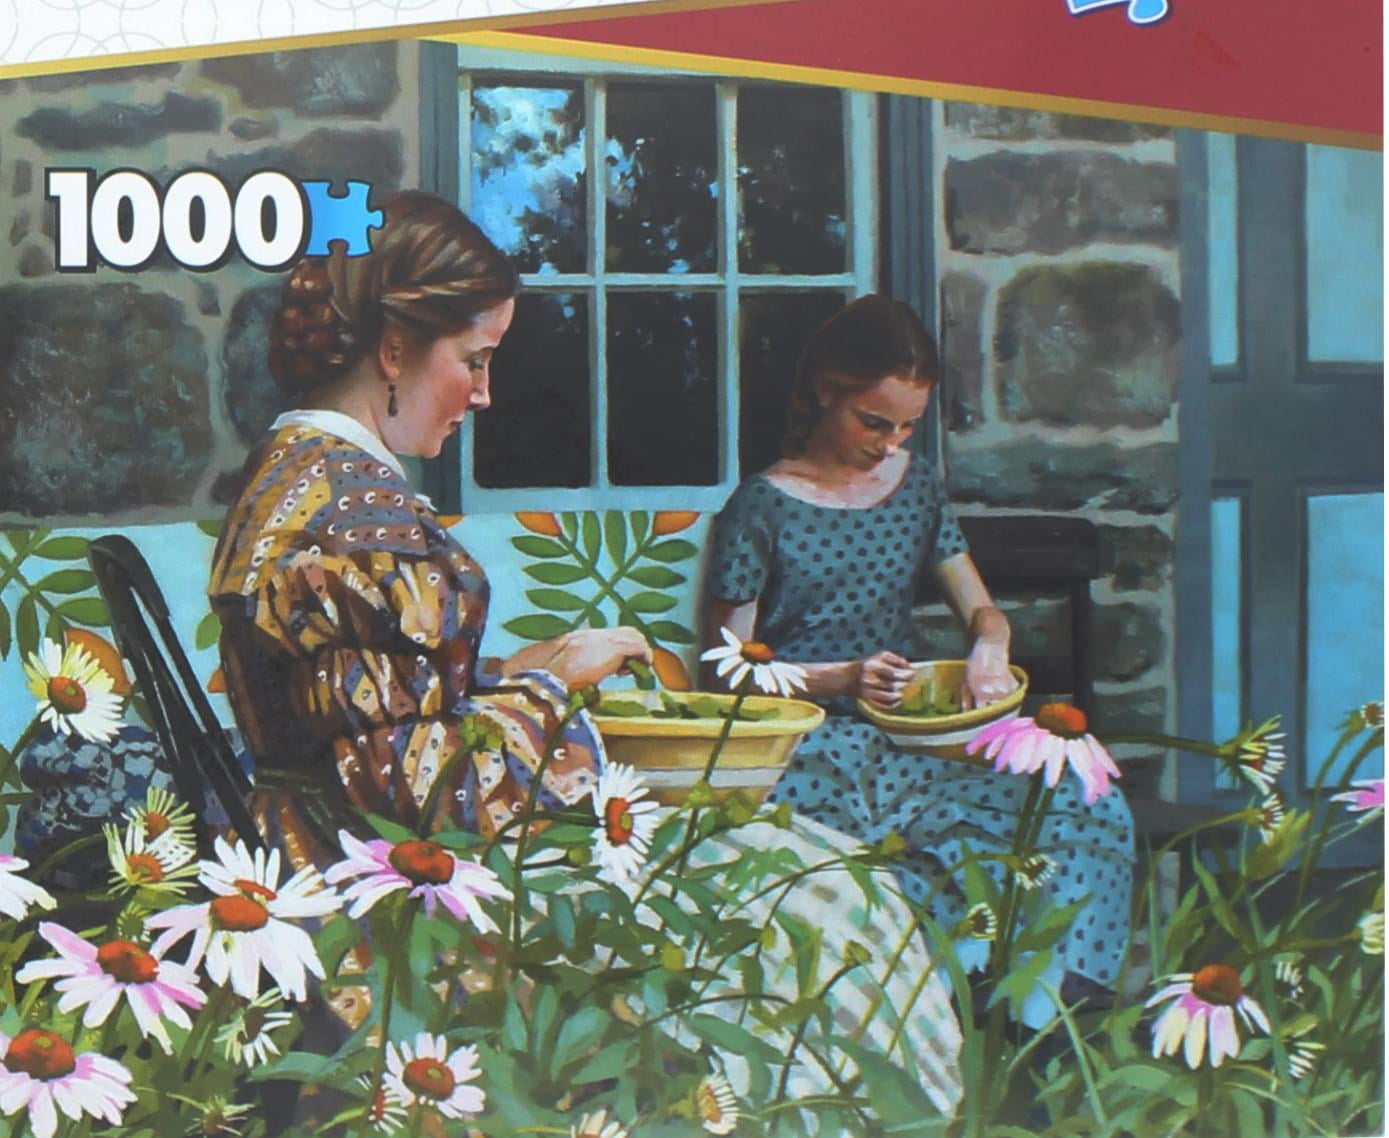 Snapping Beans 1,000 PC JIGSAW PUZZLE With Keepsake Box Brand New 